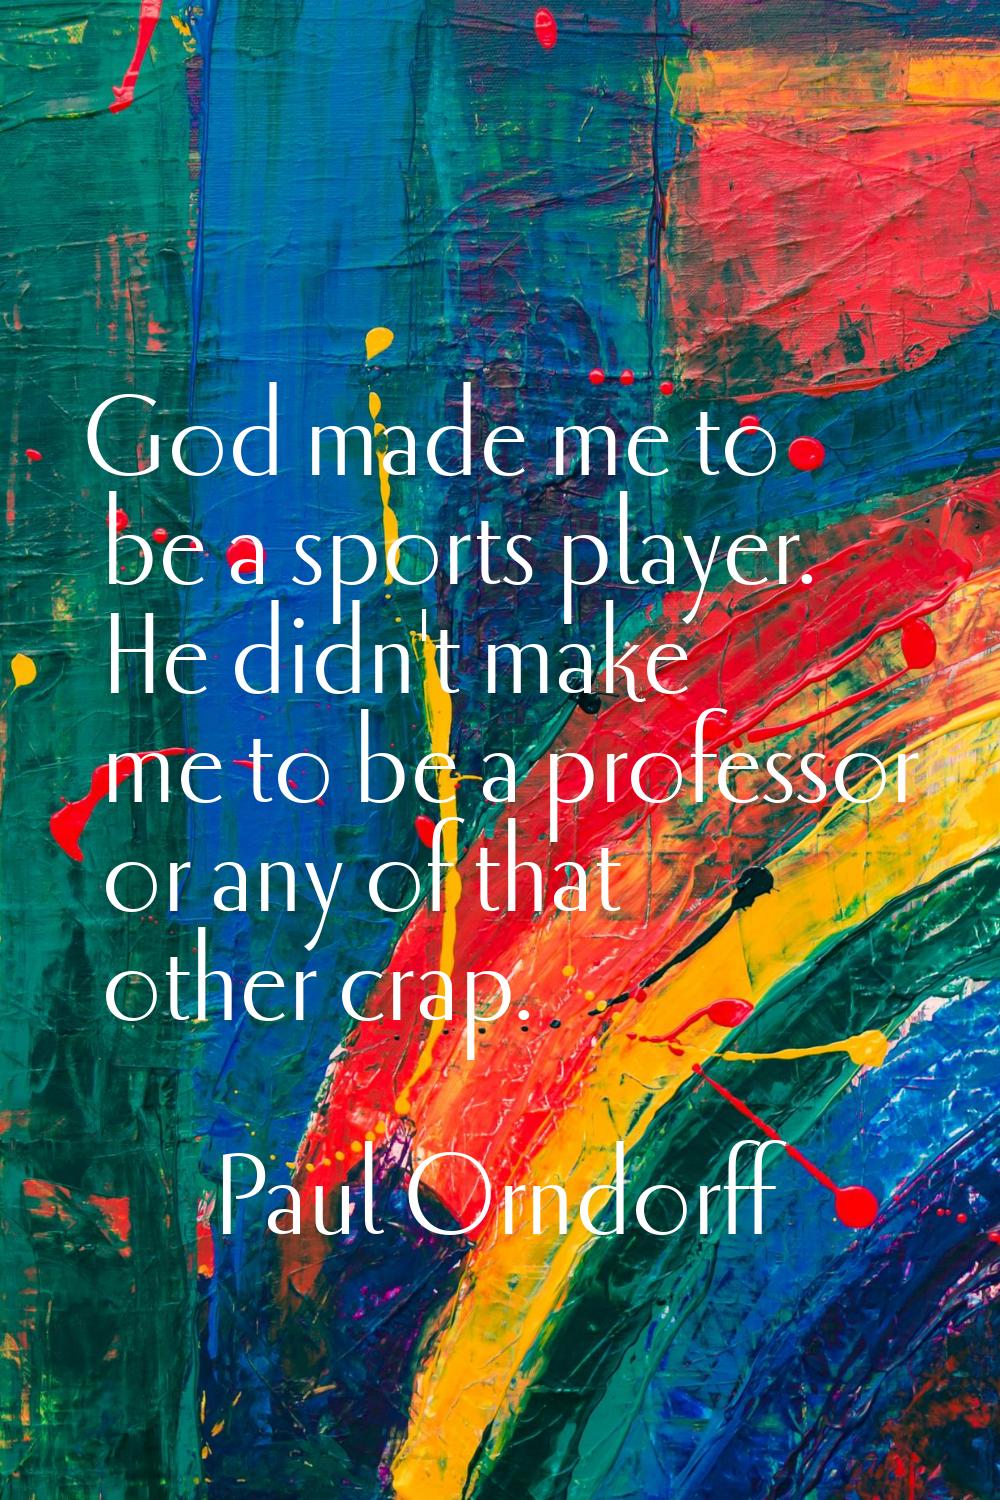 God made me to be a sports player. He didn't make me to be a professor or any of that other crap.